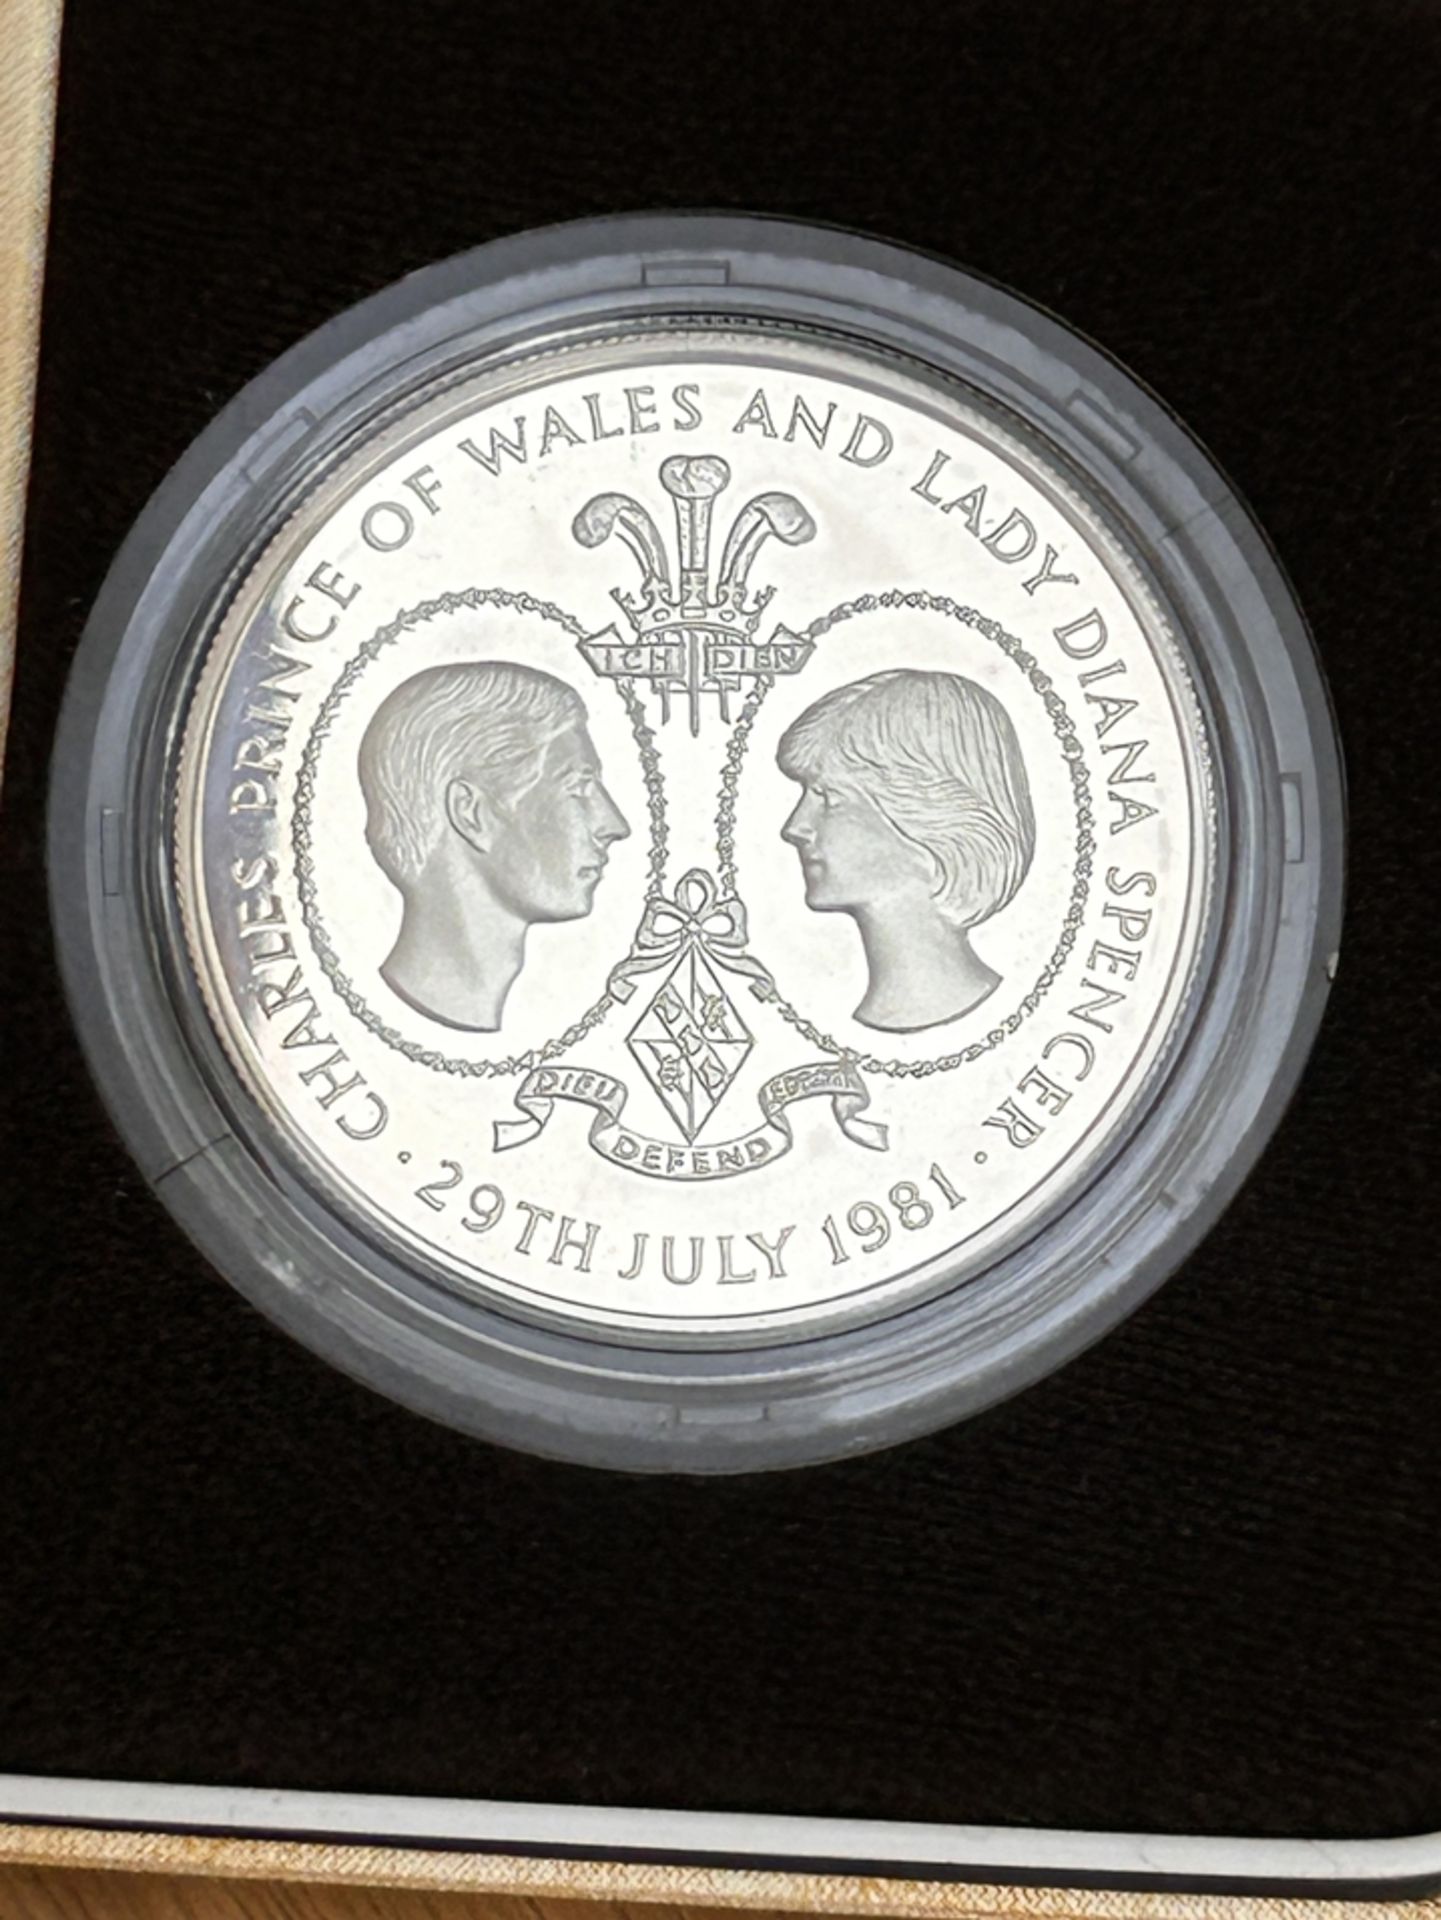 25 Pence-Elizabeth II Diana and Charles, Tristan da Cunha, boxed, 1981, Silber-925-, 28,8 gr, mit - Image 2 of 4